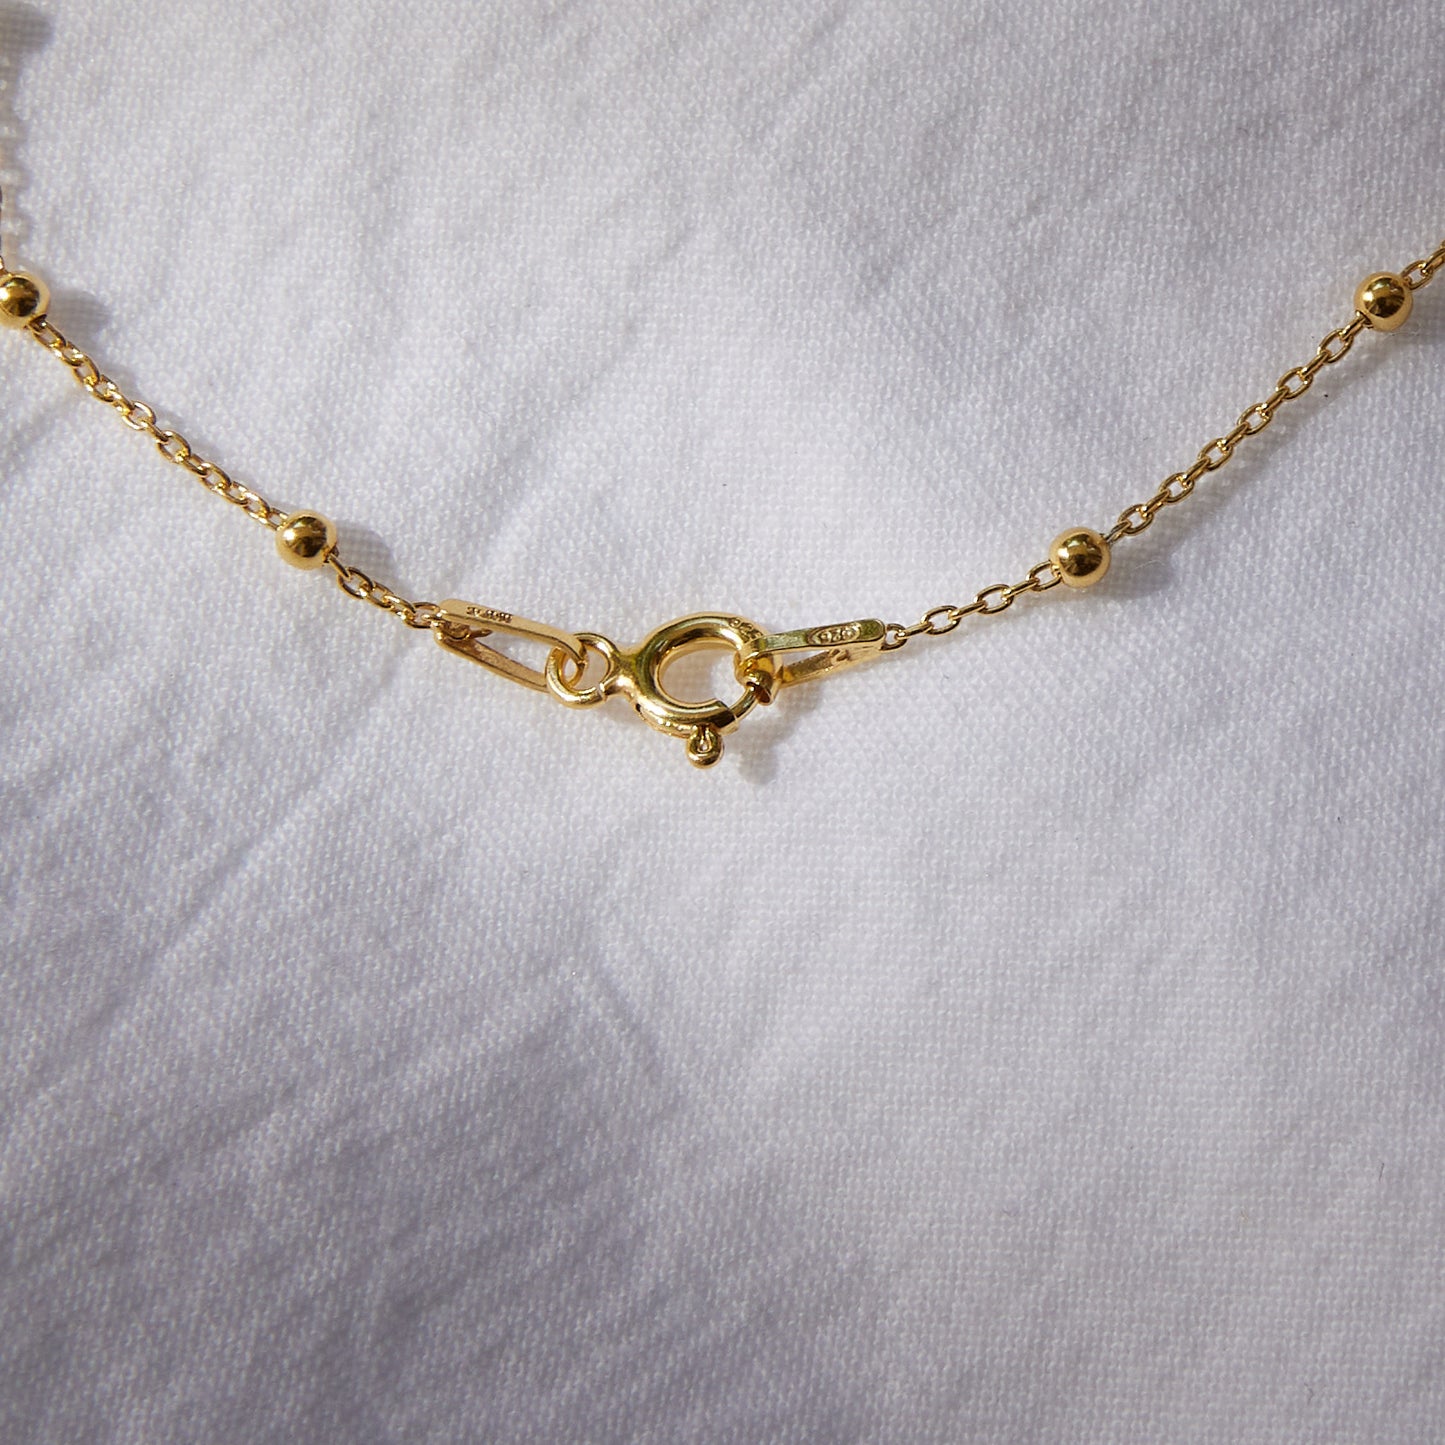 Ball chain Necklace 24k Gold plated sterling silver